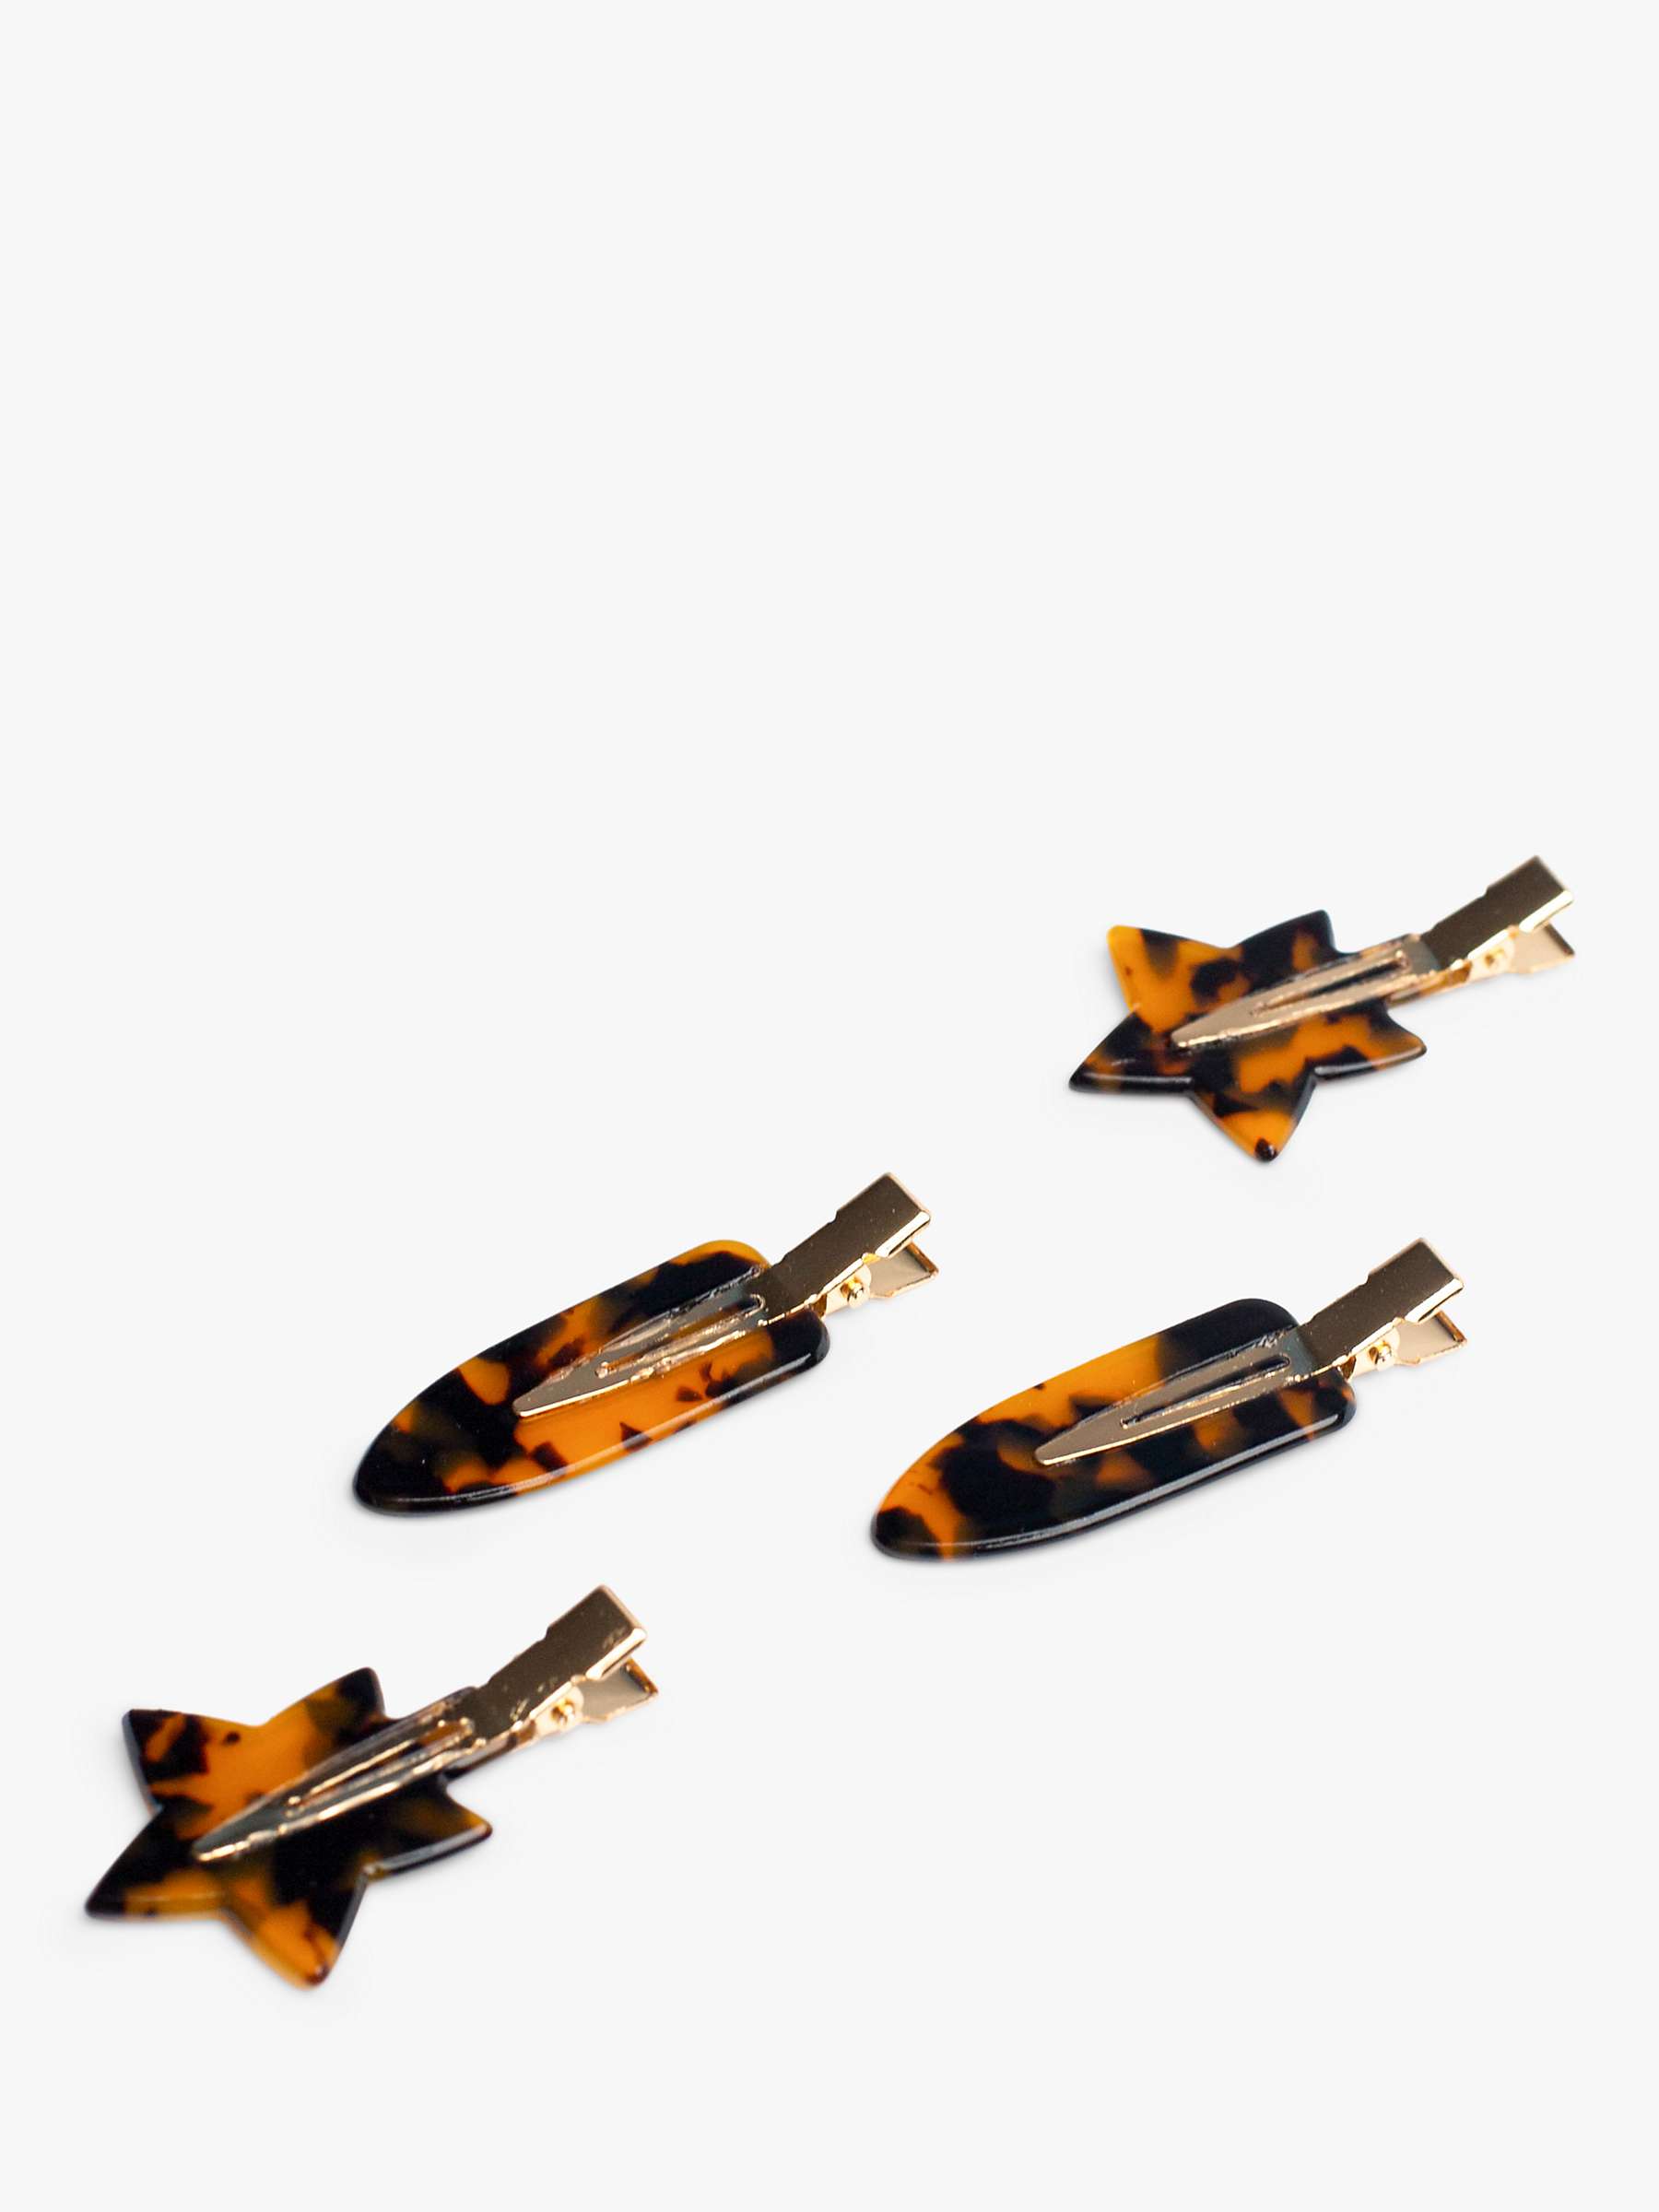 Buy Bloom & Bay Tulip Flat Tortoiseshell Hair Clips, Pack of 4, Brown/Gold Online at johnlewis.com